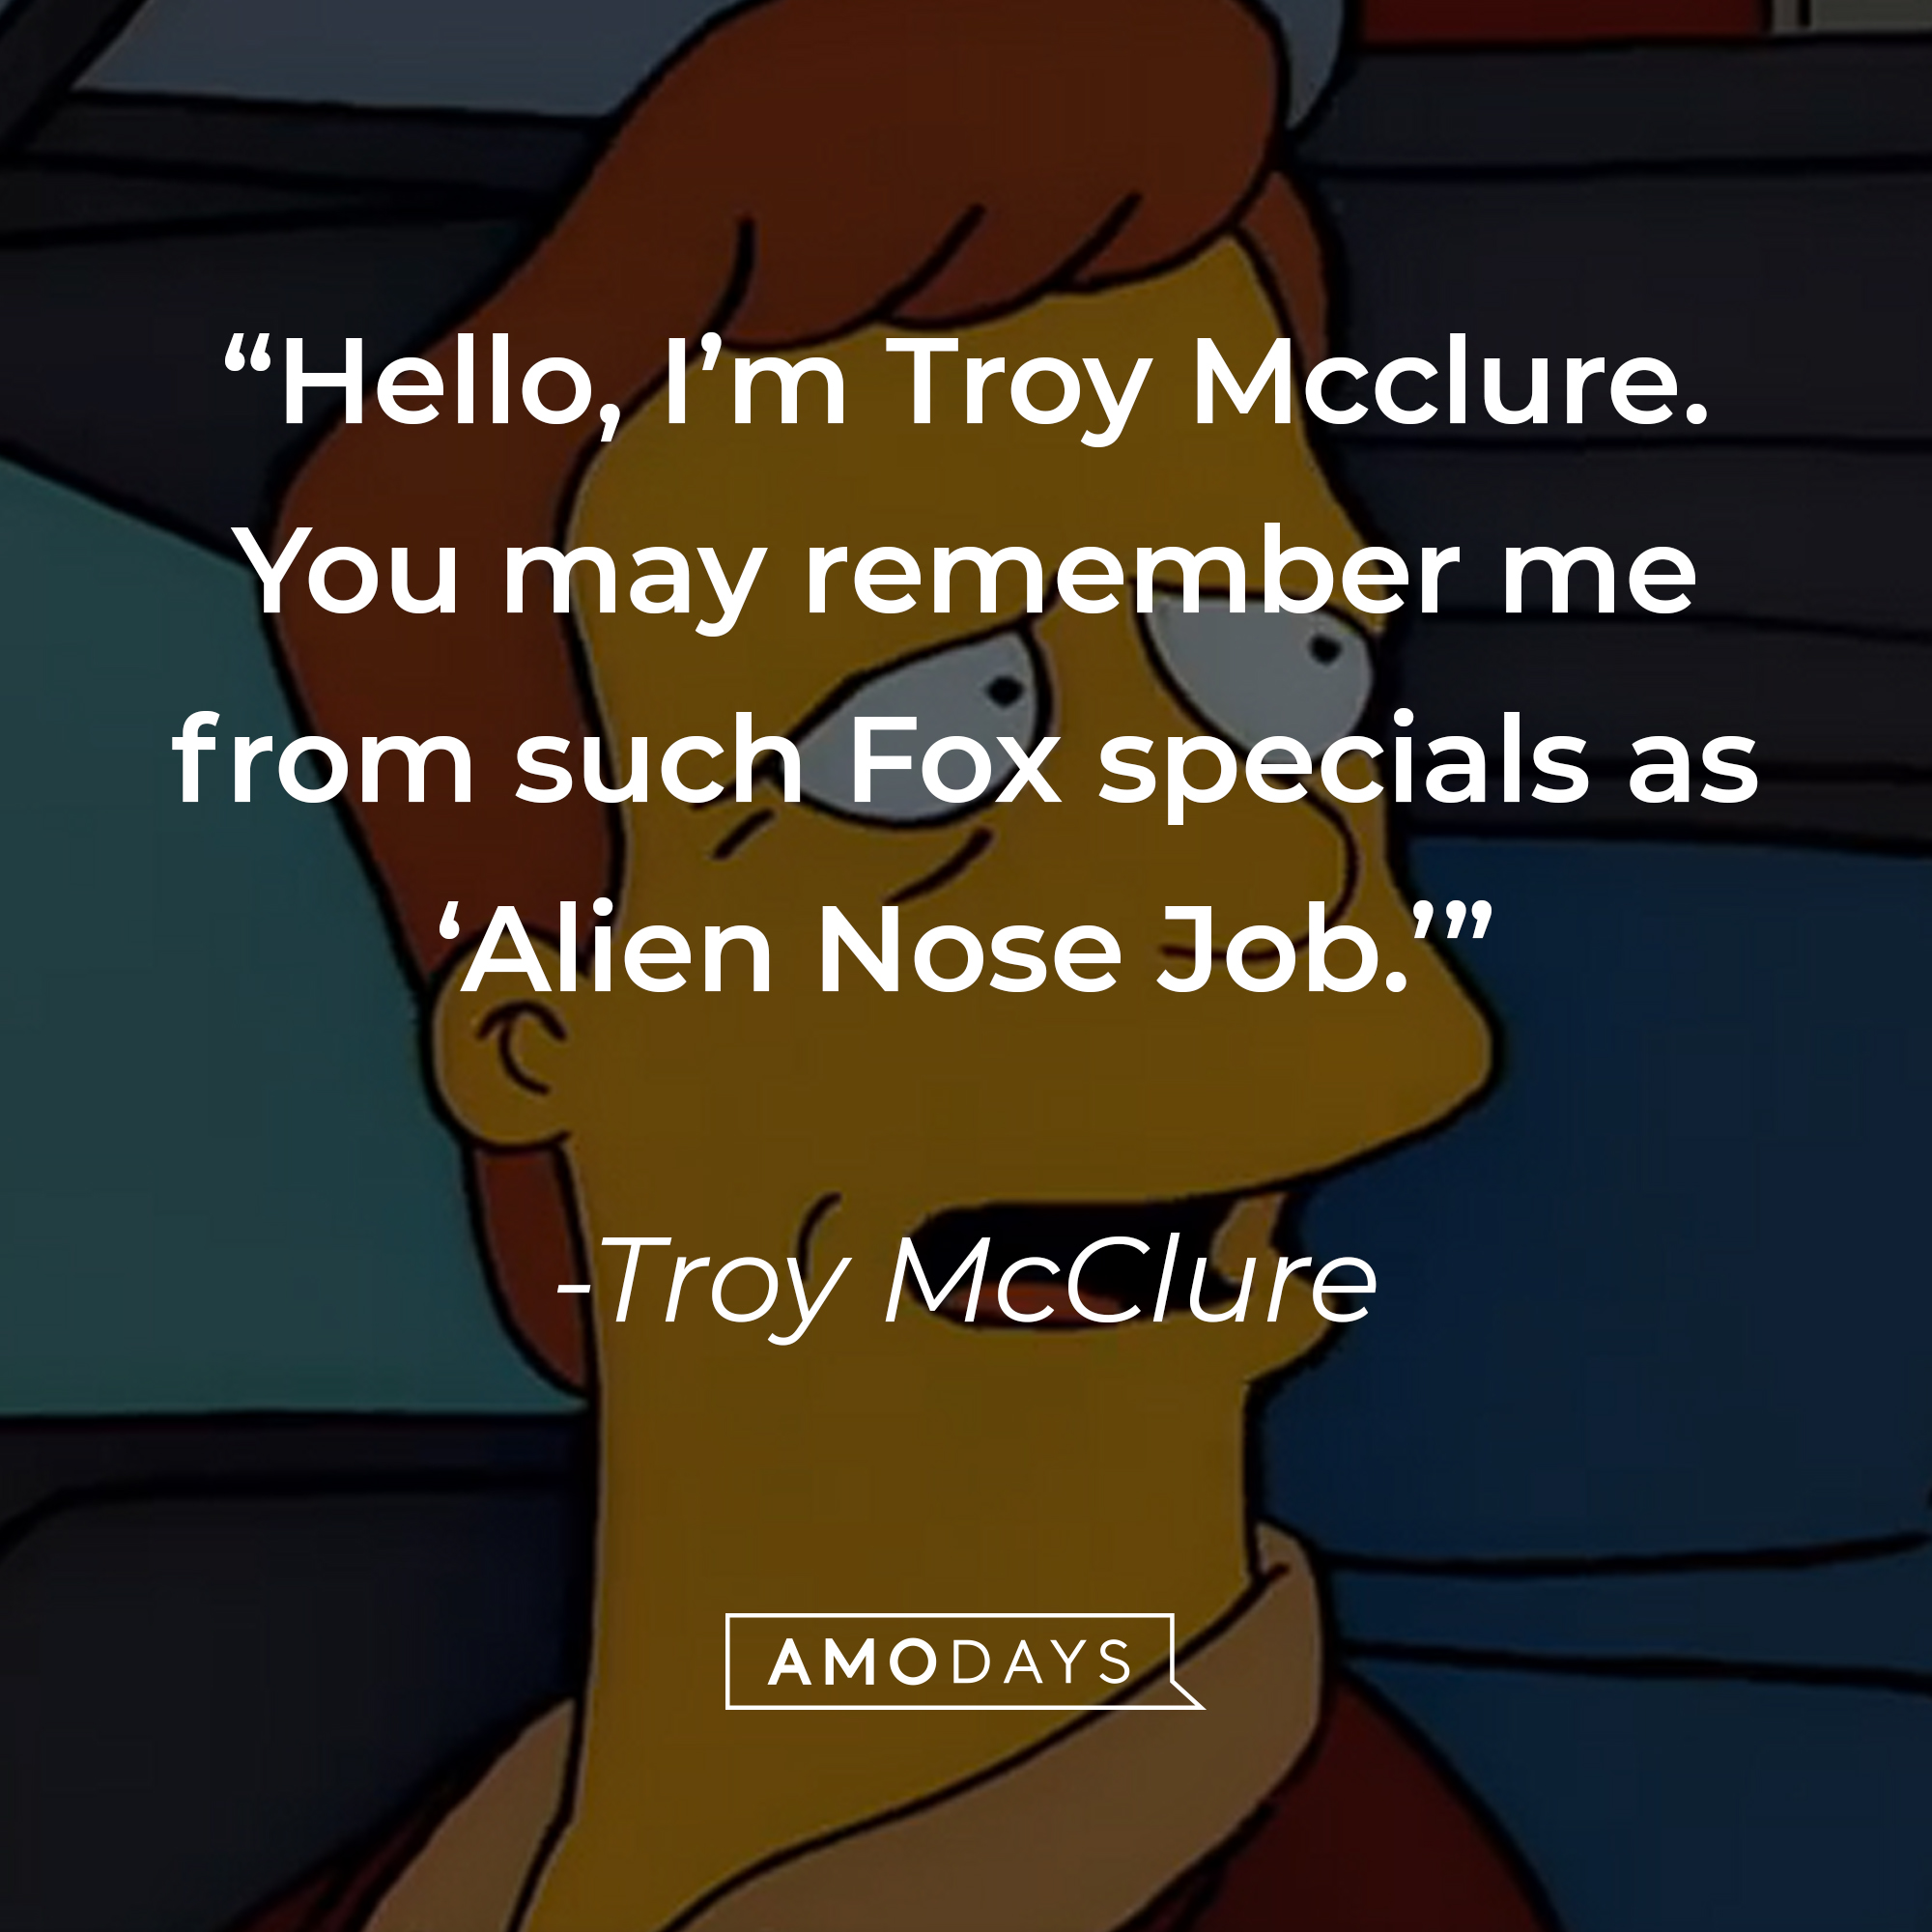 Troy McClure, with his quote: “Hello, I’m Troy Mcclure. You may remember me from such Fox specials as ‘Alien Nose Job,'” | Source: facebook.com/TheSimpsons